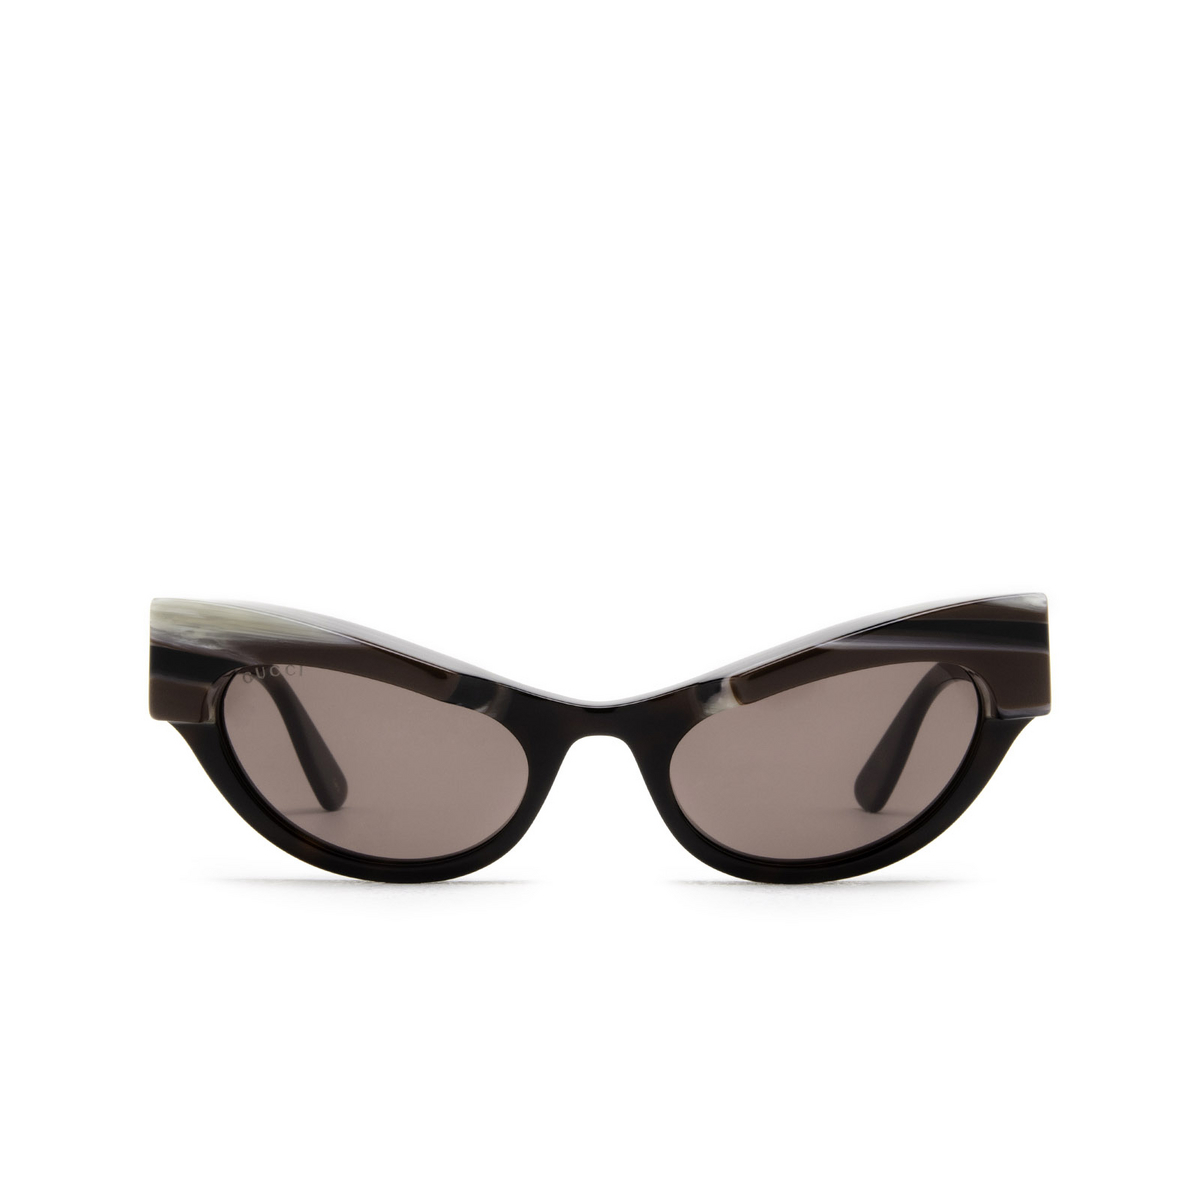 Gucci® Cat-eye Sunglasses: GG1167S color Havana 002 - front view.